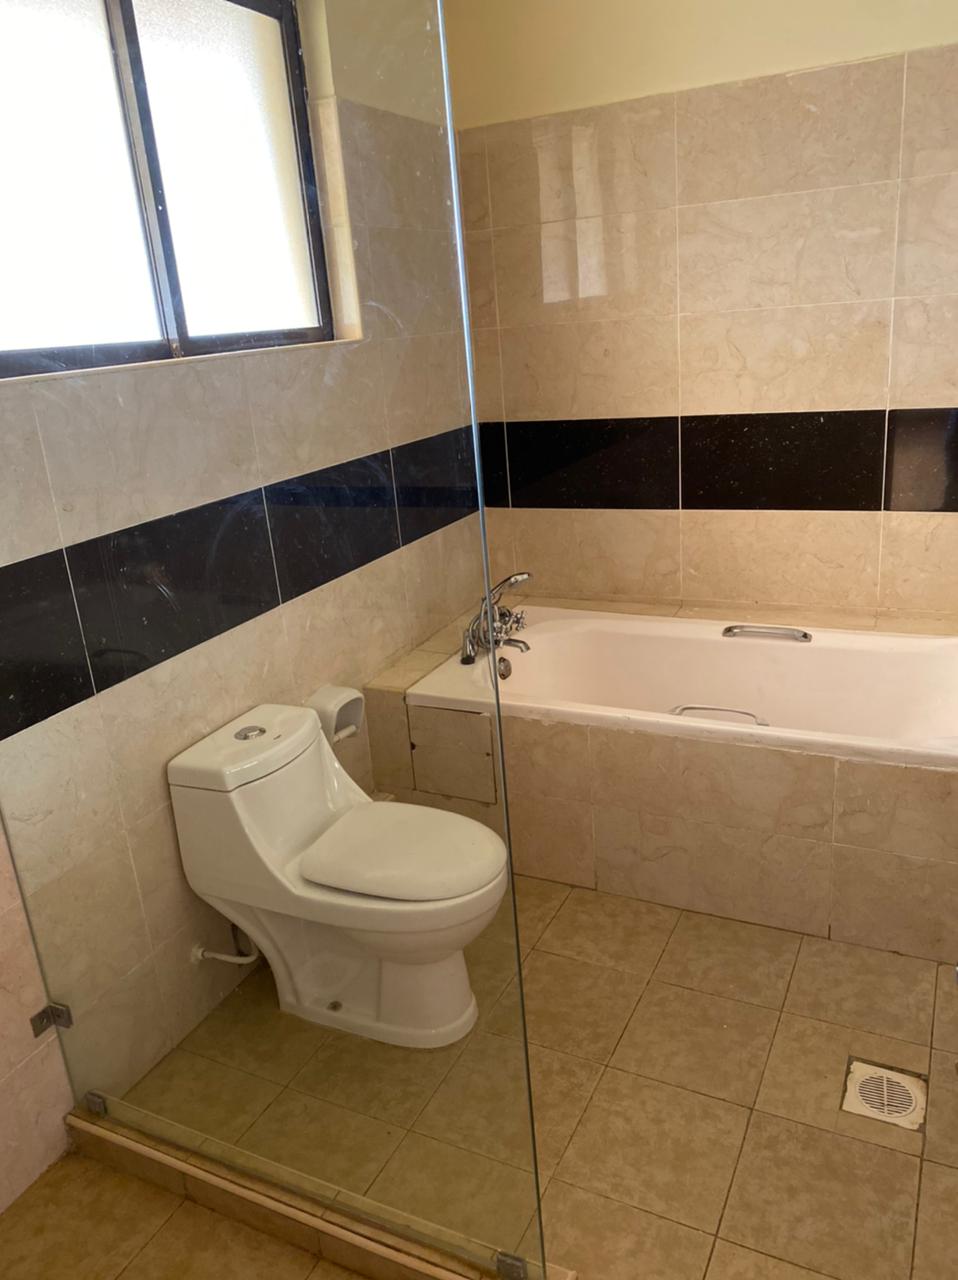 4 Bedroom All Ensuite Apartment for Rent in Kilimani at Ksh200k with exciting amenities  (14)